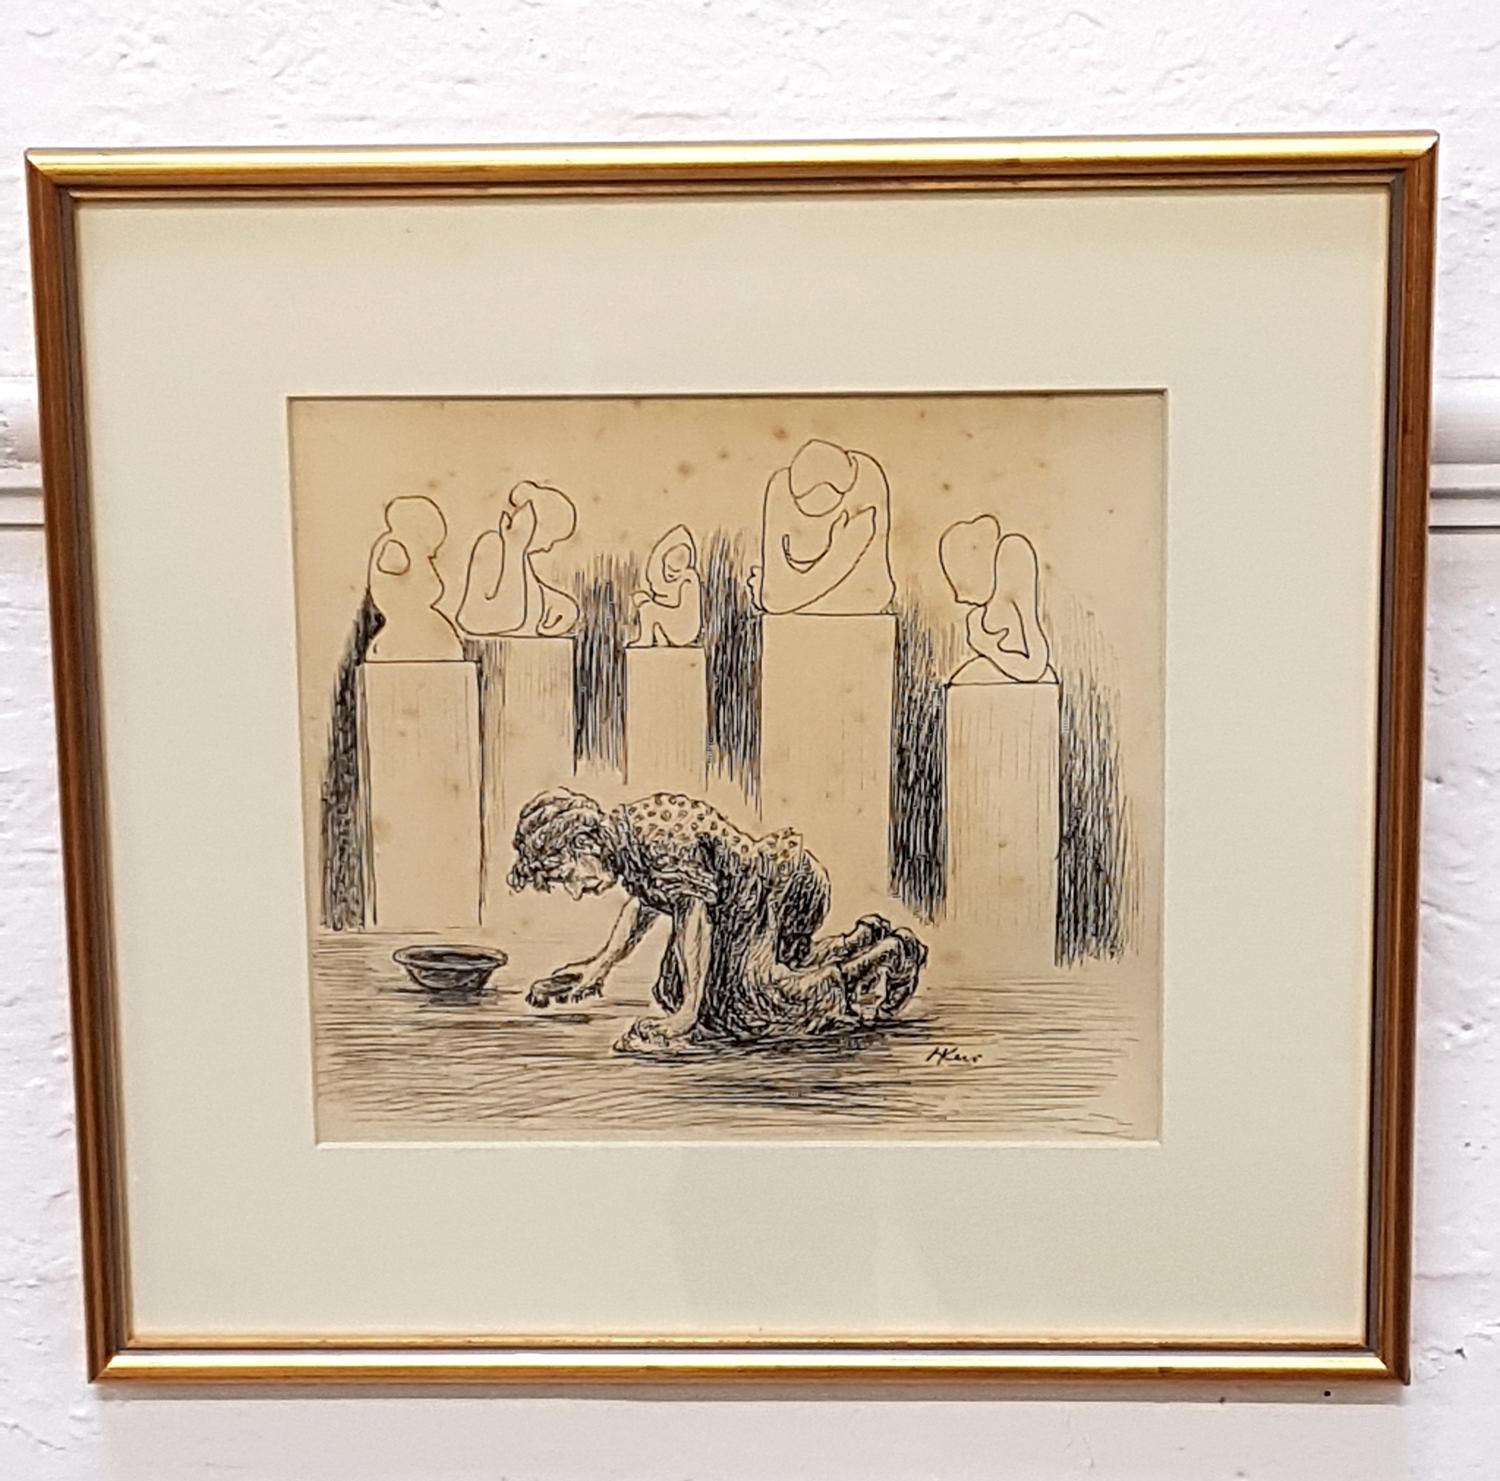 HARRY KEIR (Scottish 1902-1977) Hard At Work At The Museum, pen and ink on paper, signed, 22.5cm x